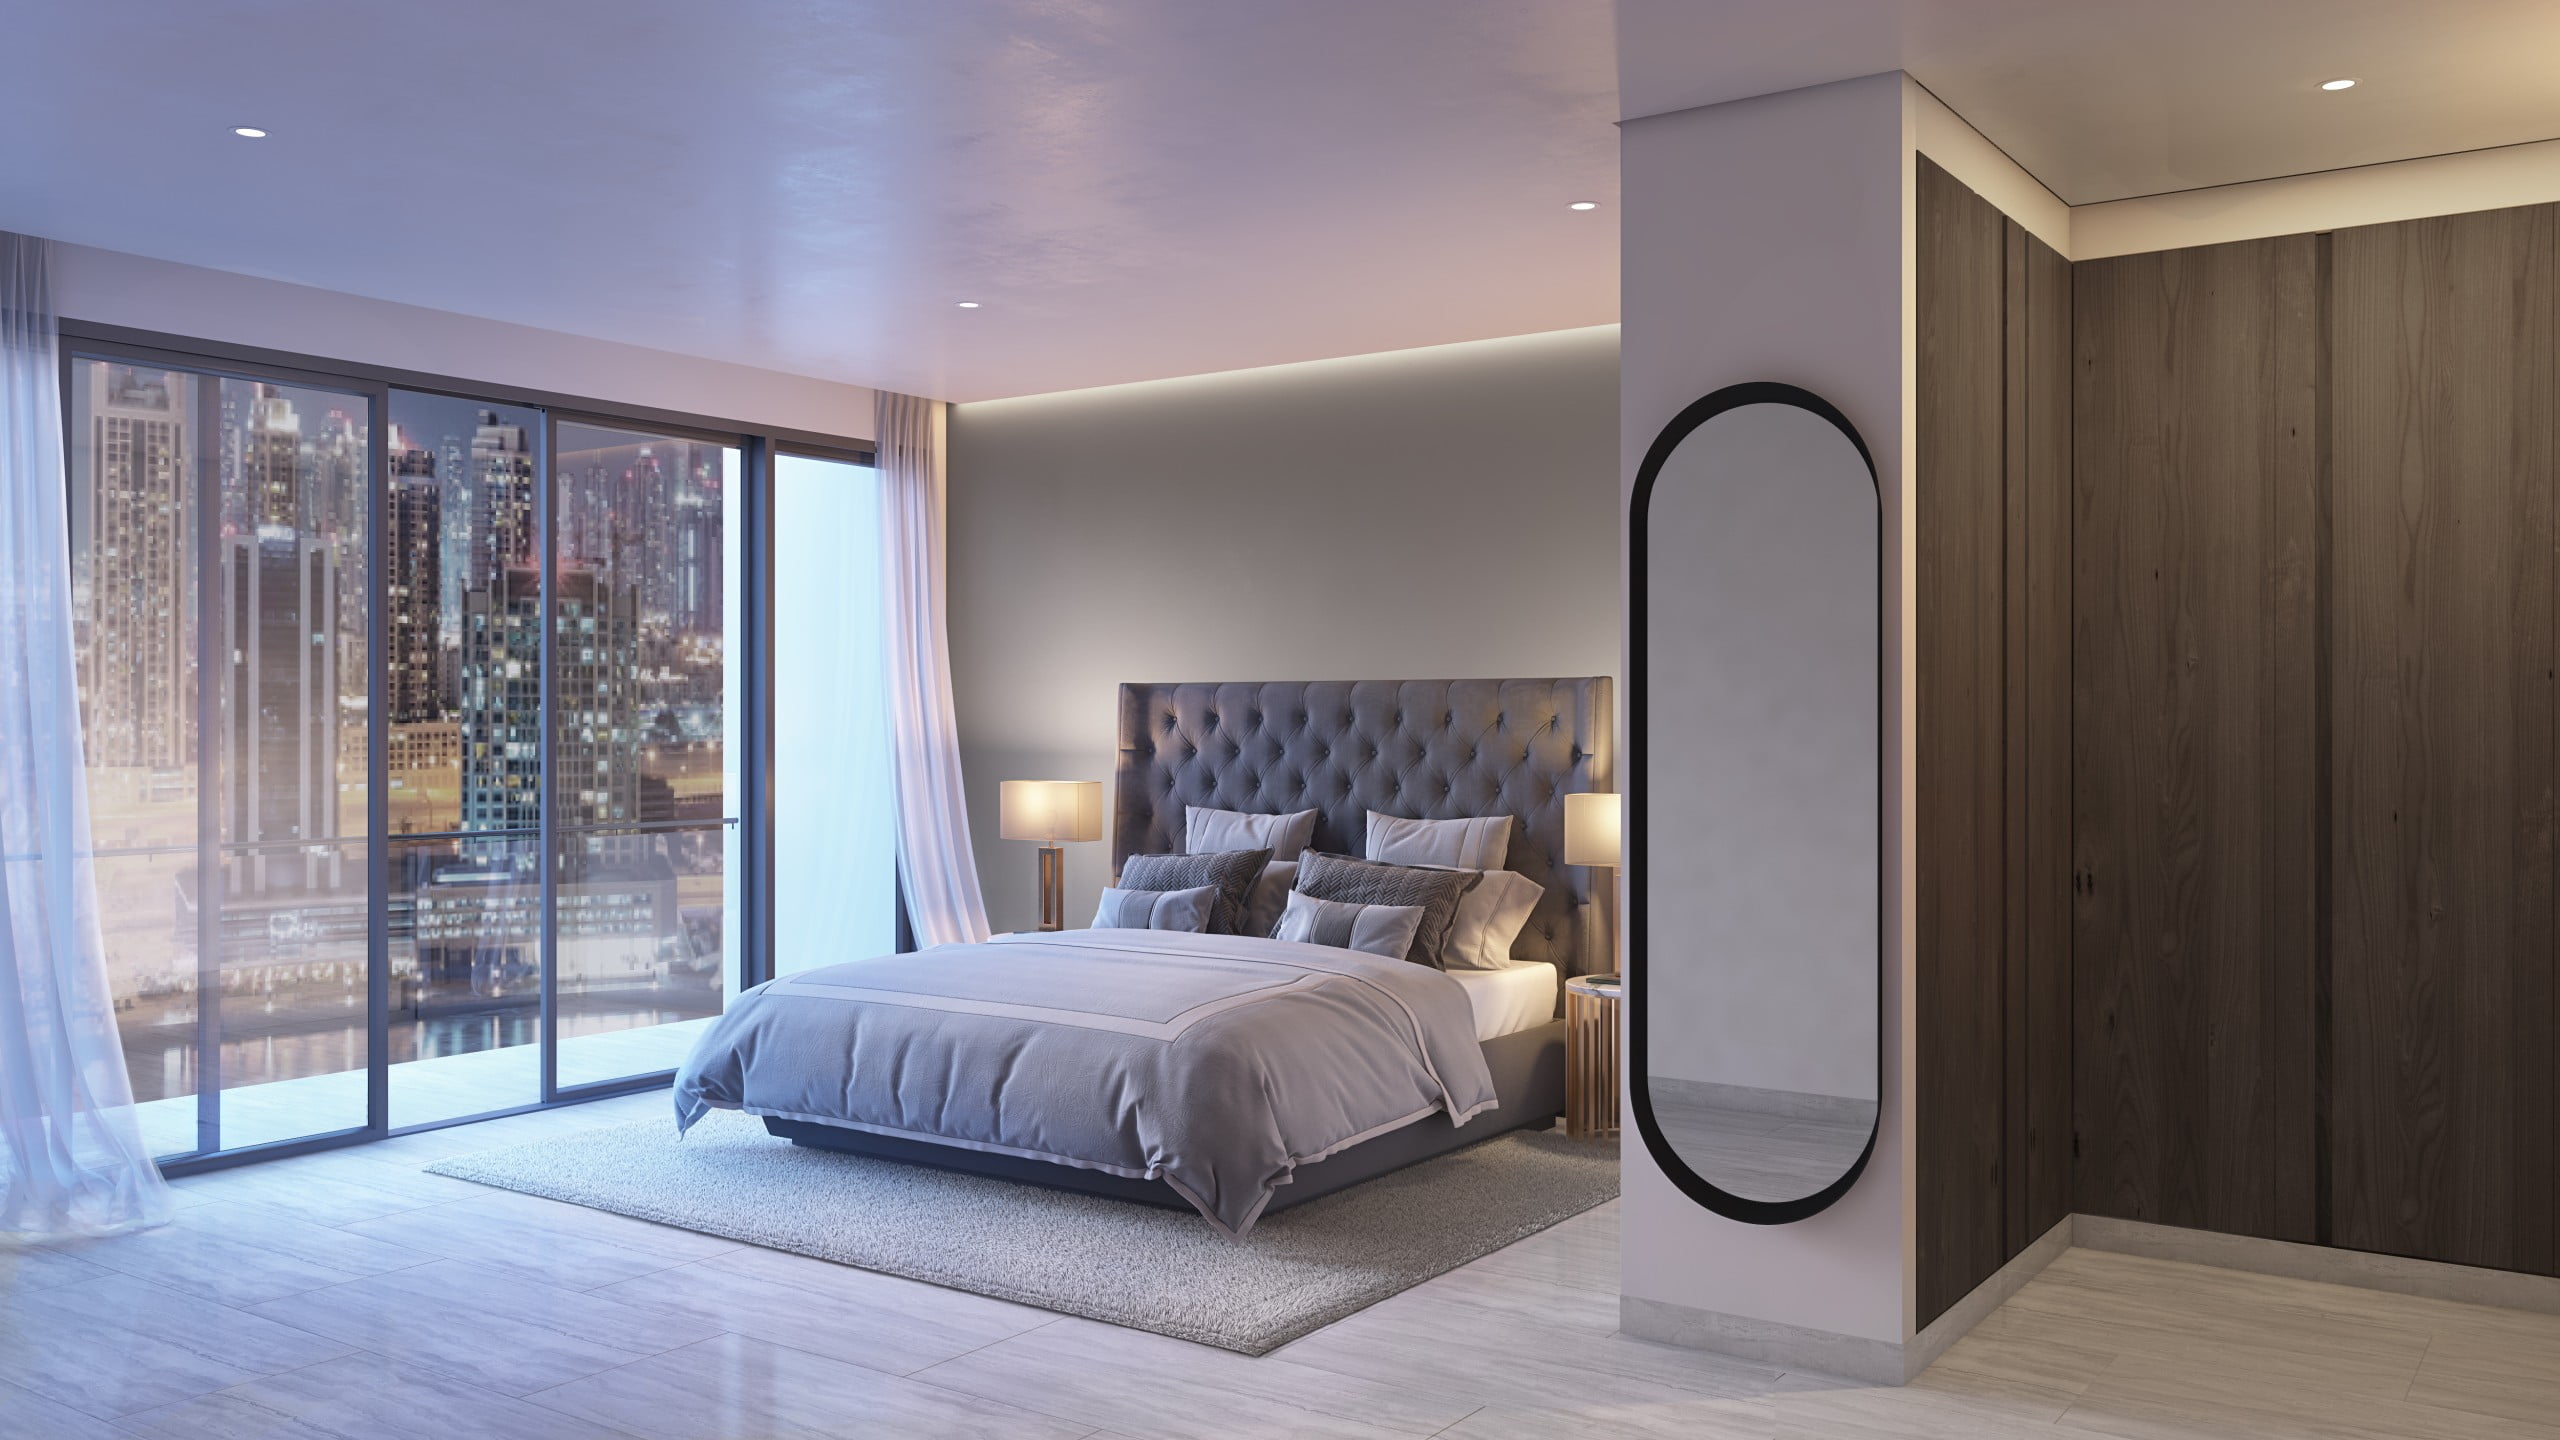 Bedroom final scaled - Immobilier Dubai